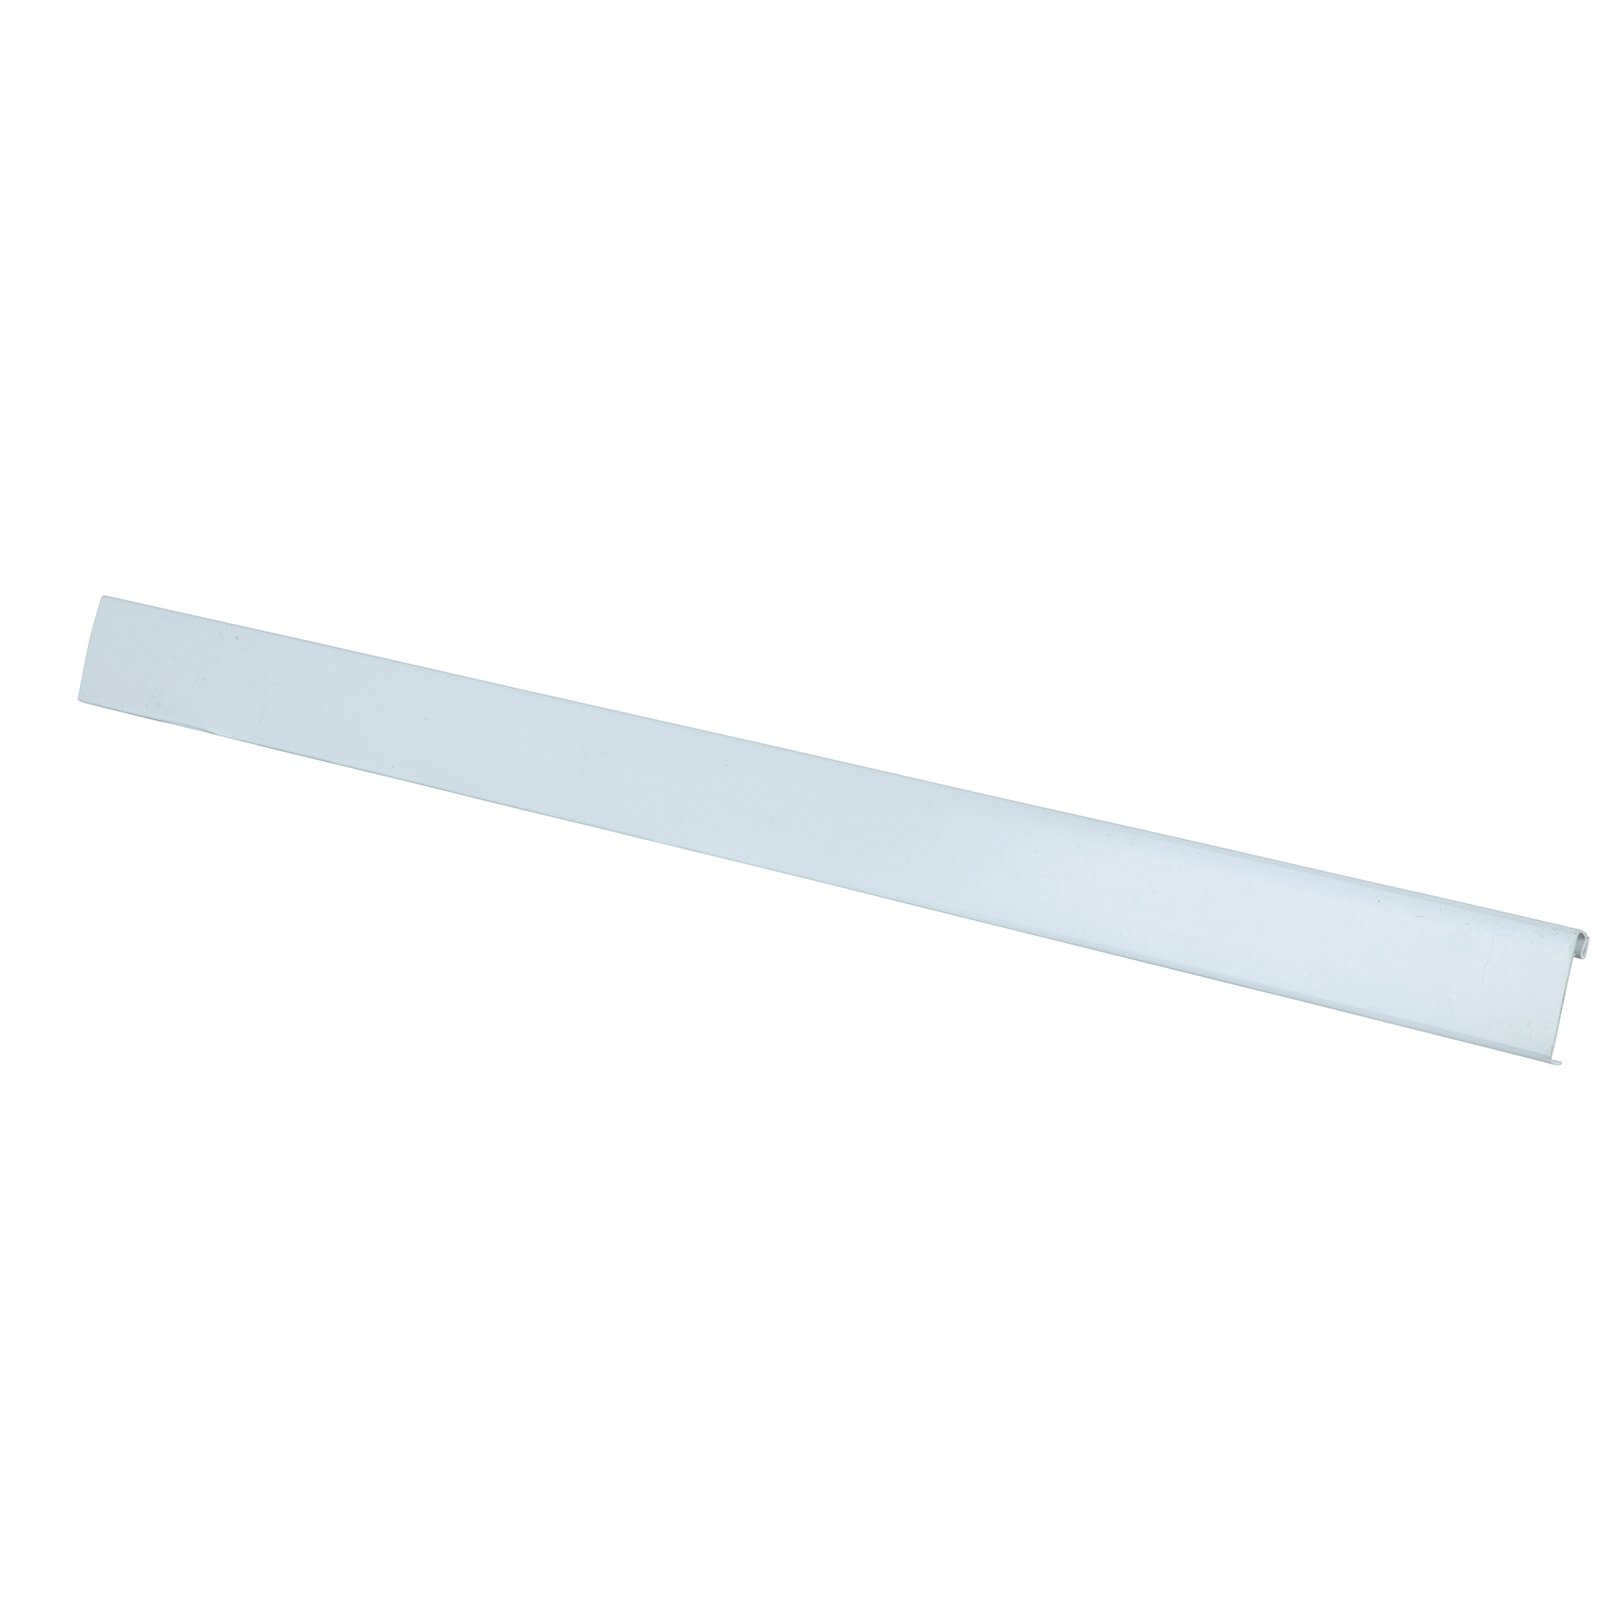 Hang Track Cover - White - 558mm